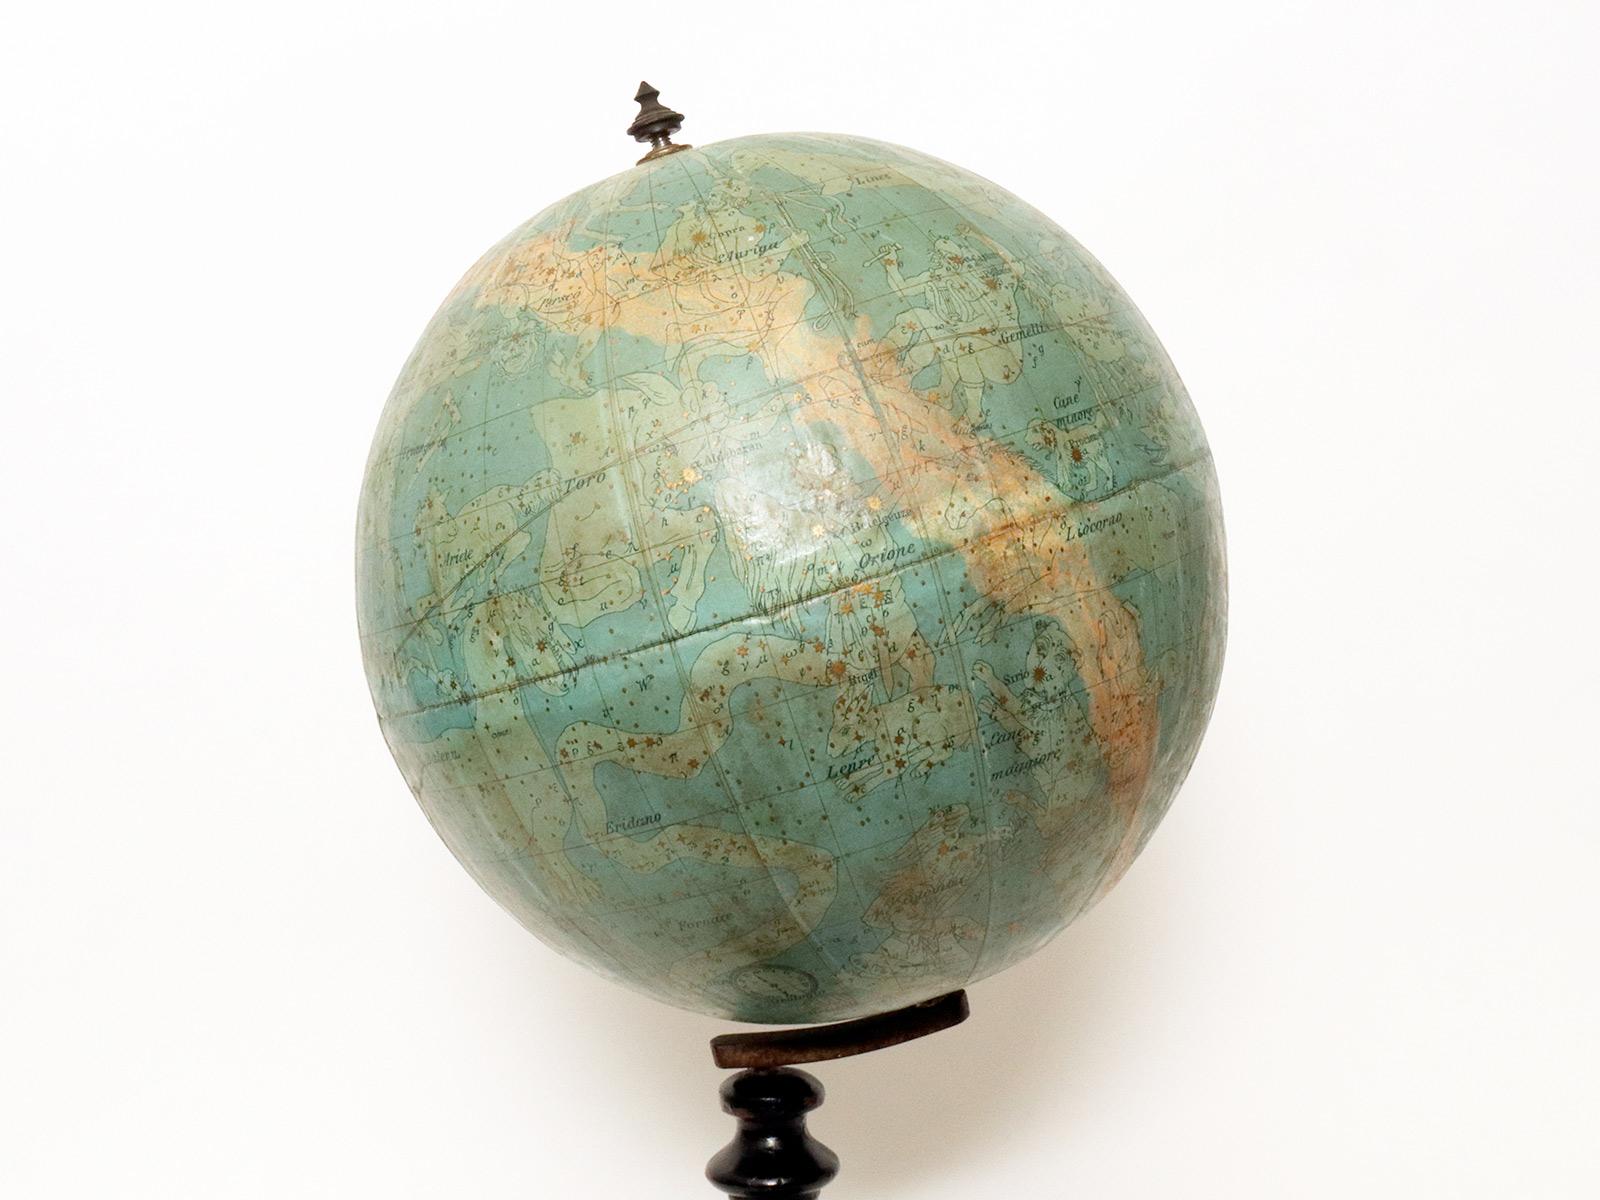 Wood A pair of celestial and terrestrial globes, E.Pini, Gussoni & Dotti, Italy 1892. For Sale